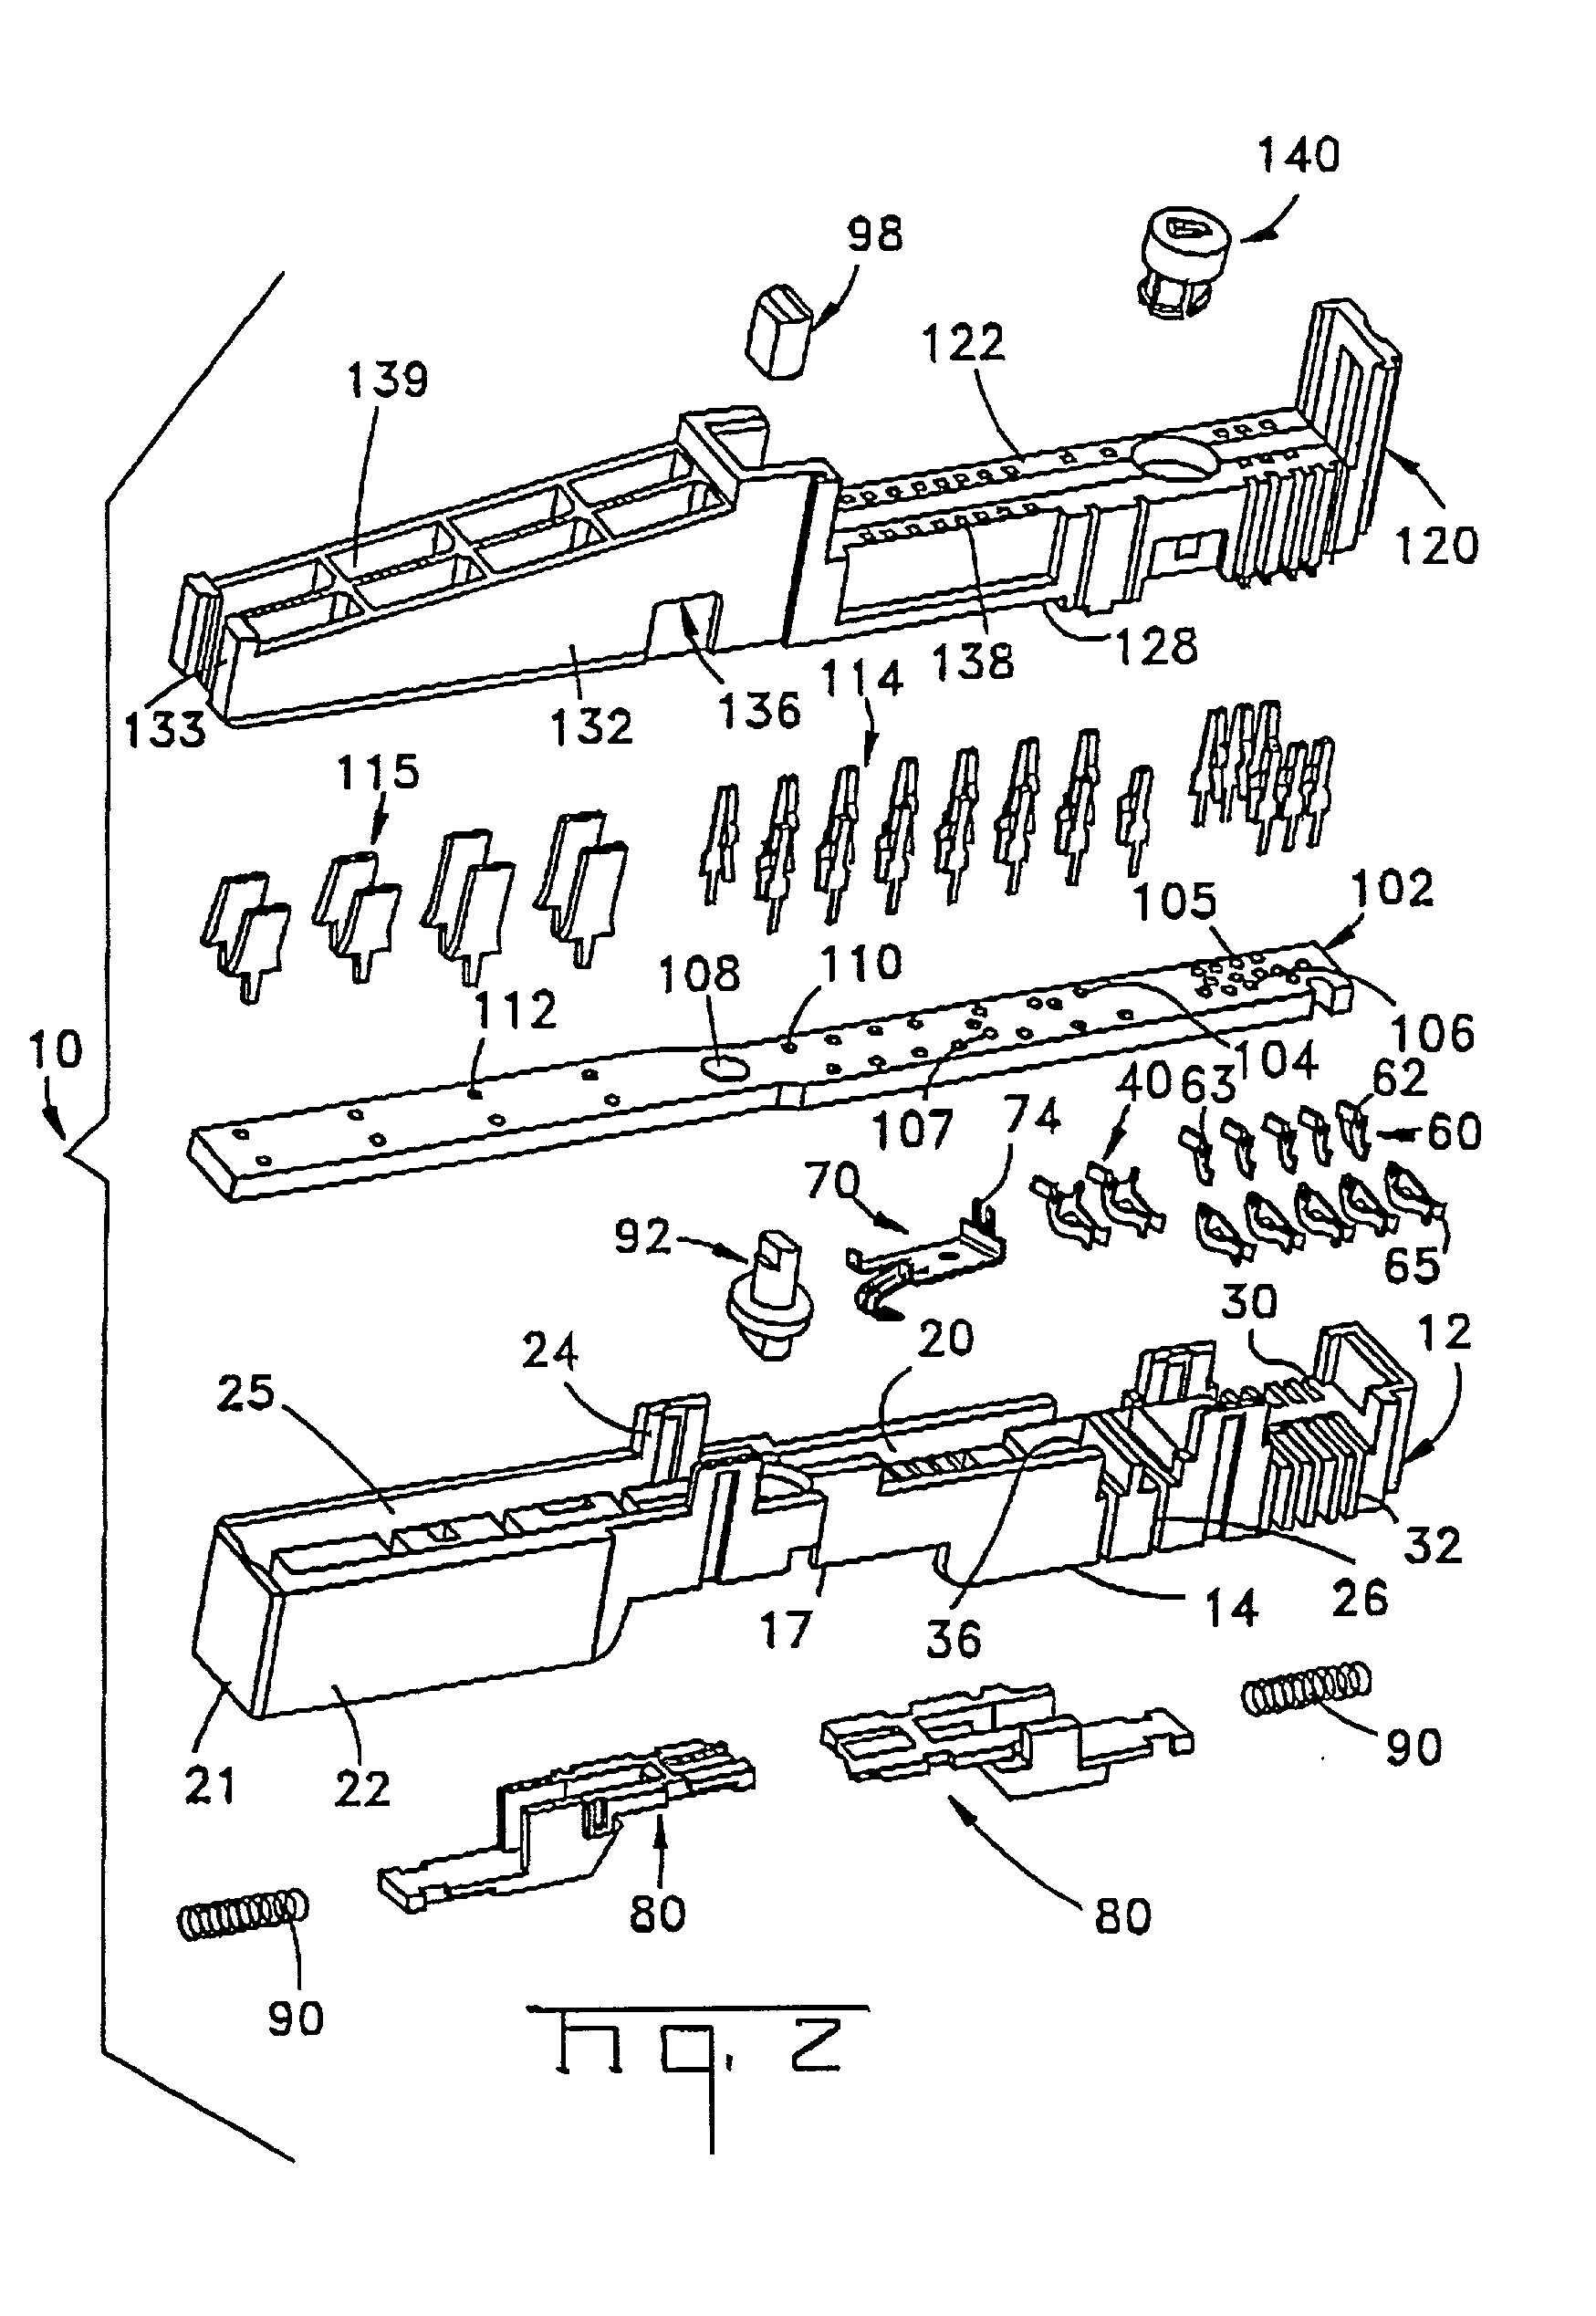 Input/output device having removable module